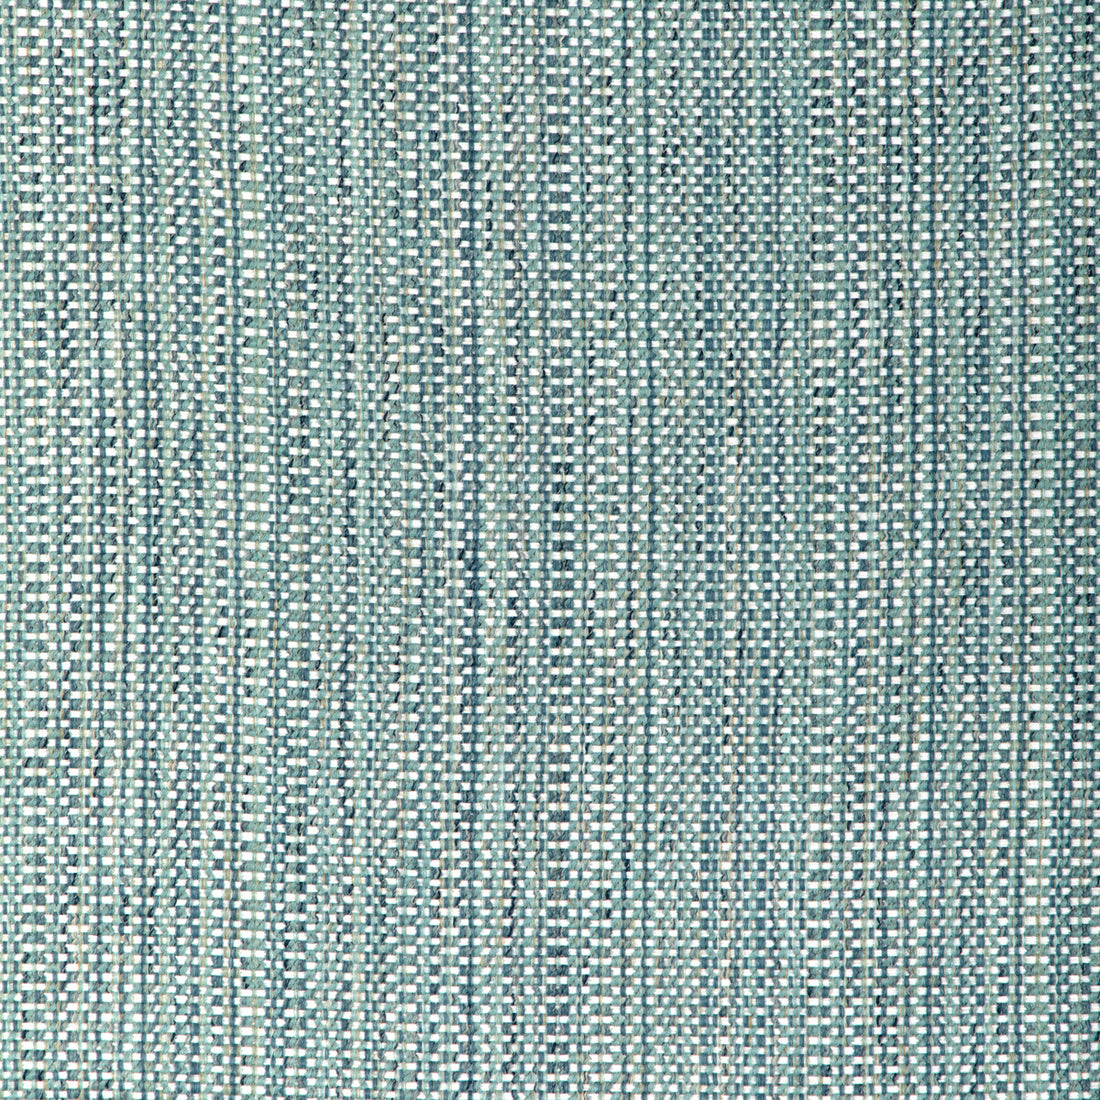 Kravet Smart fabric in 37018-513 color - pattern 37018.513.0 - by Kravet Smart in the Gis collection